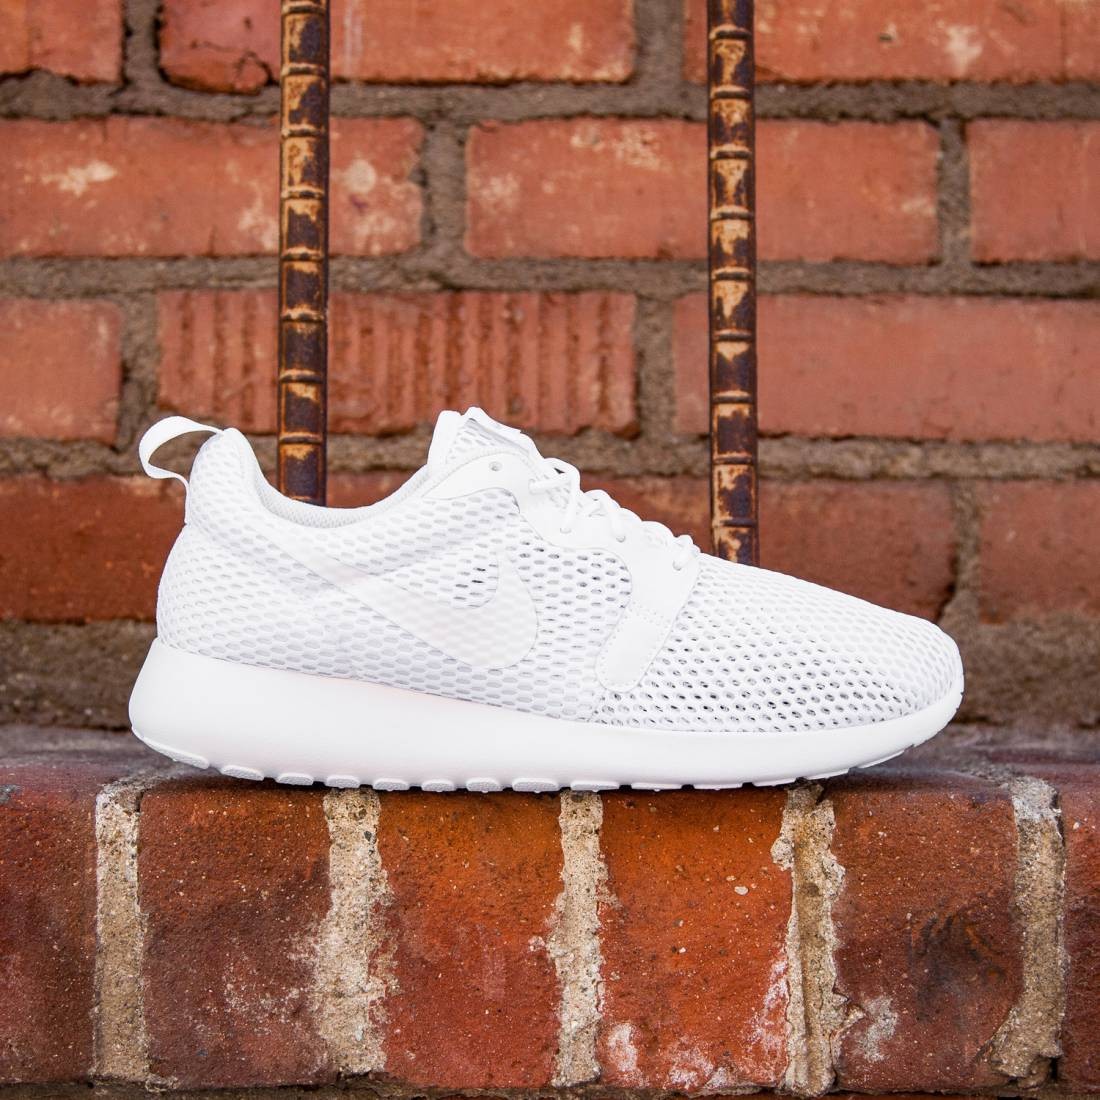 Nike One Hyperfuse BR (white/pure platinum//white)